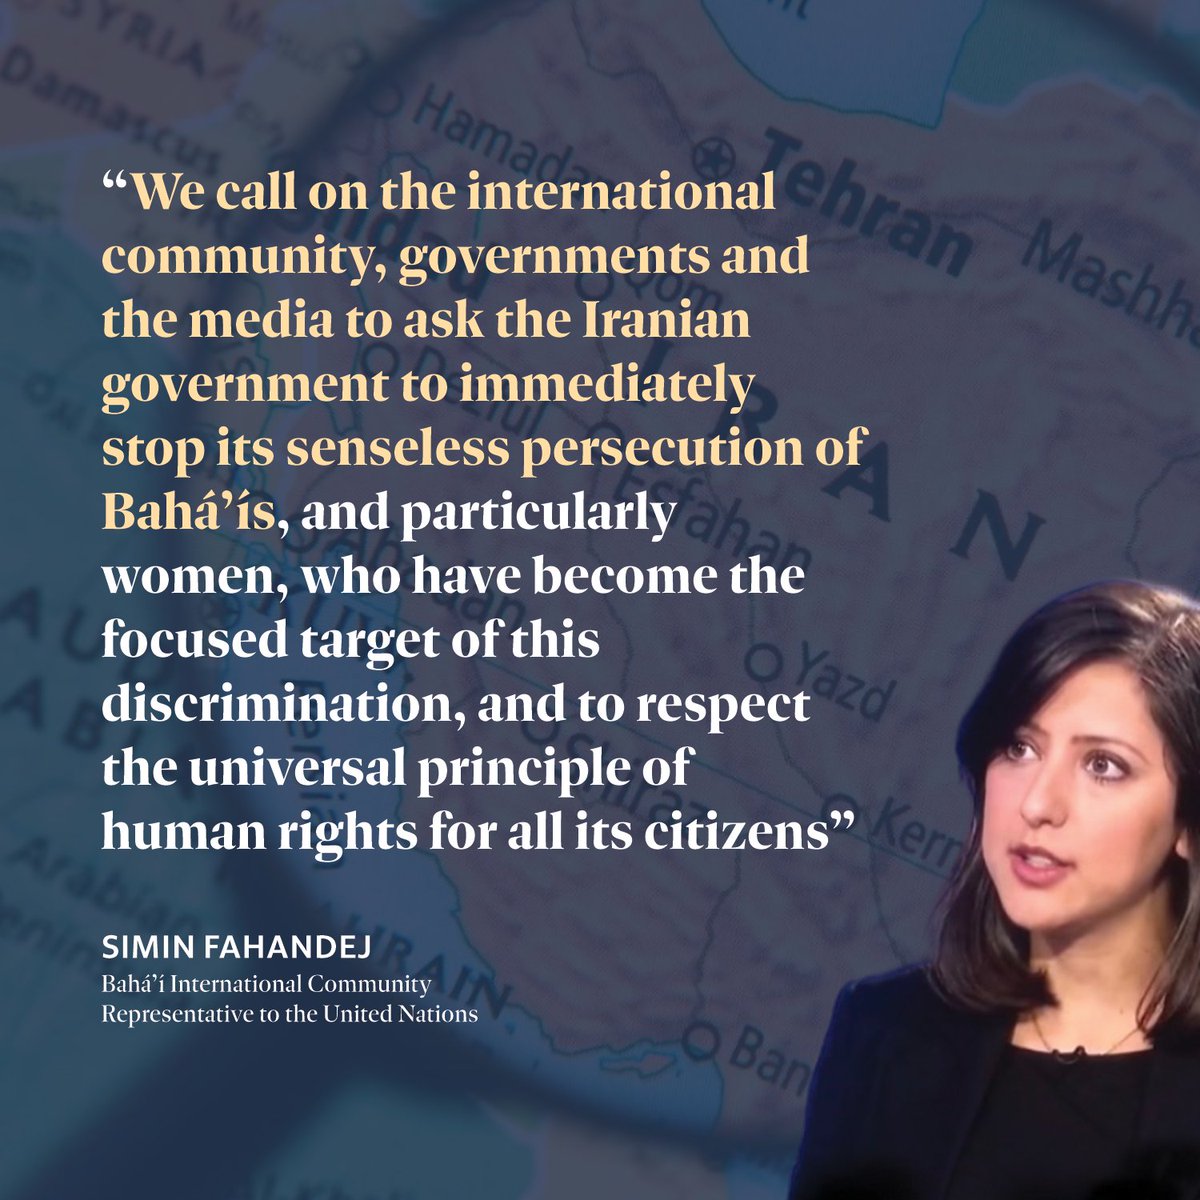 Bahá’í Women Under Attack in Iran
A surge in attacks on #Bahai women across #Iran has seen 65 women, out of 85 people—more than three-quarters—summoned to court or prison. 
Our latest: bic.org/news/bahai-wom…… 
#HumanRights #OurStoryIsOne